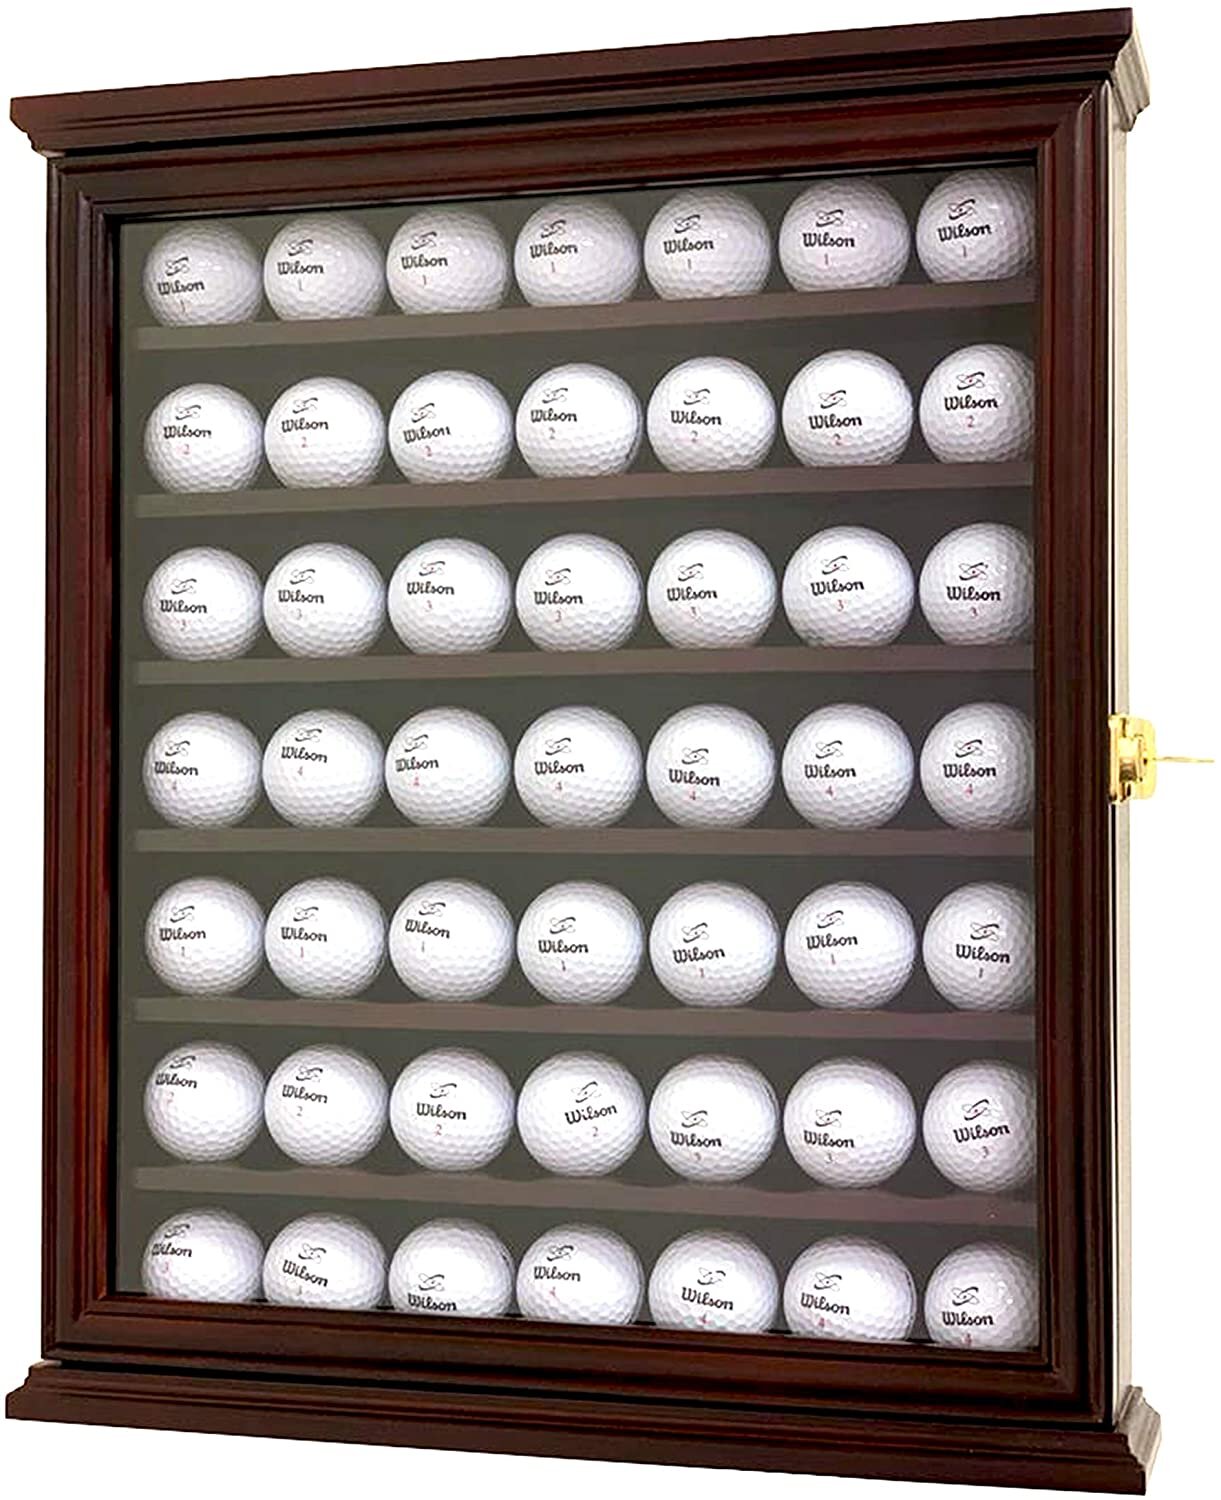 Solid Oak Hole in one display